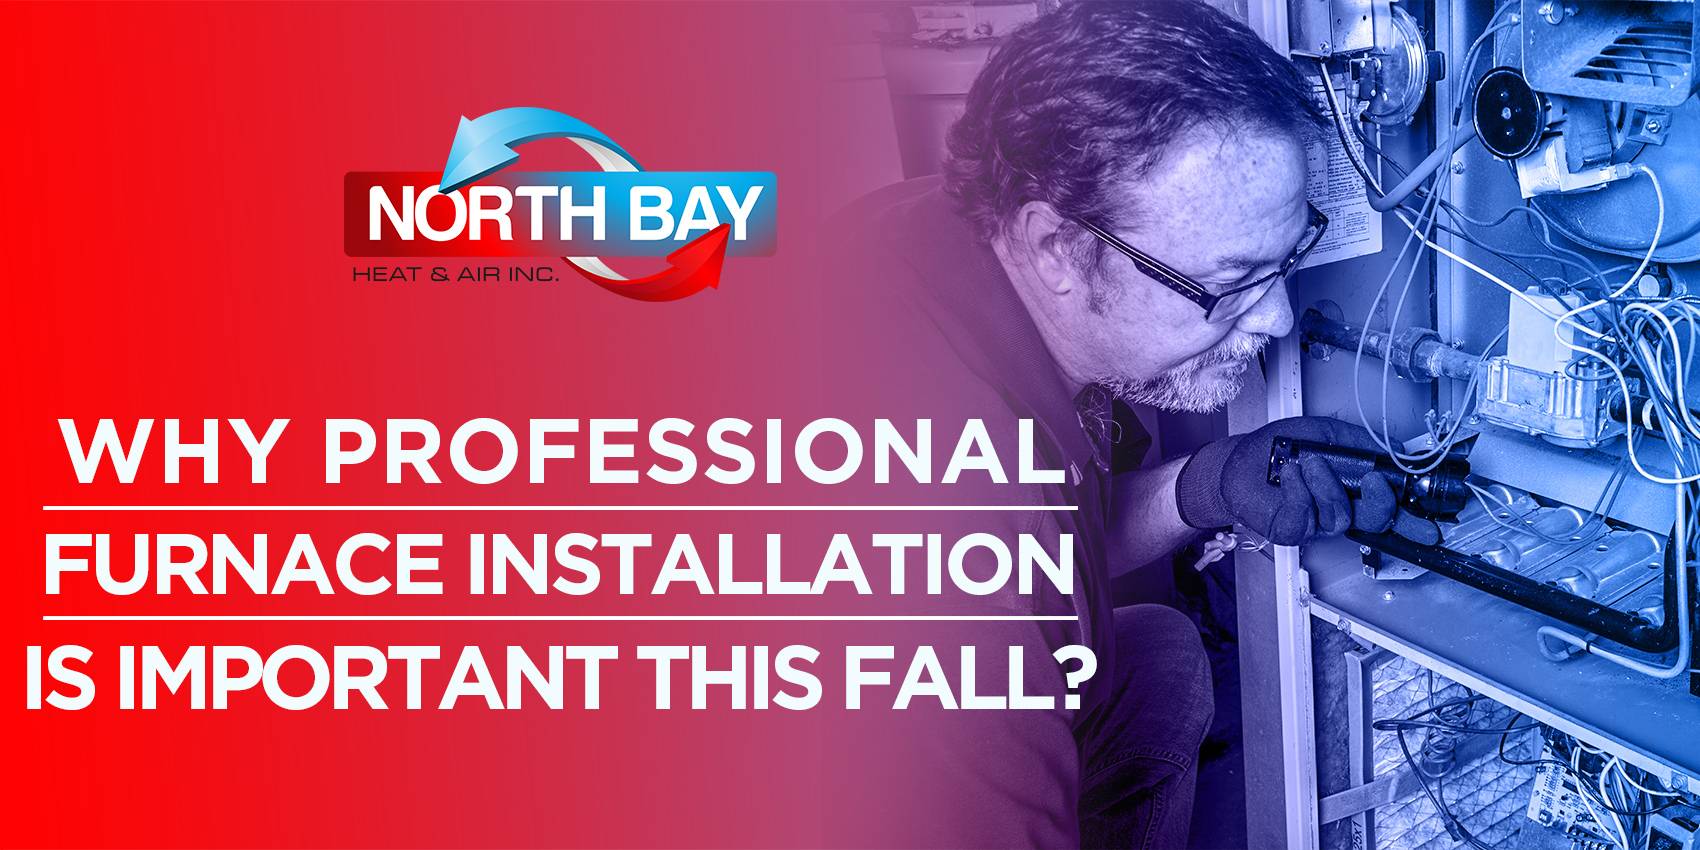 Why Professional Furnace Installation is Important This Fall?